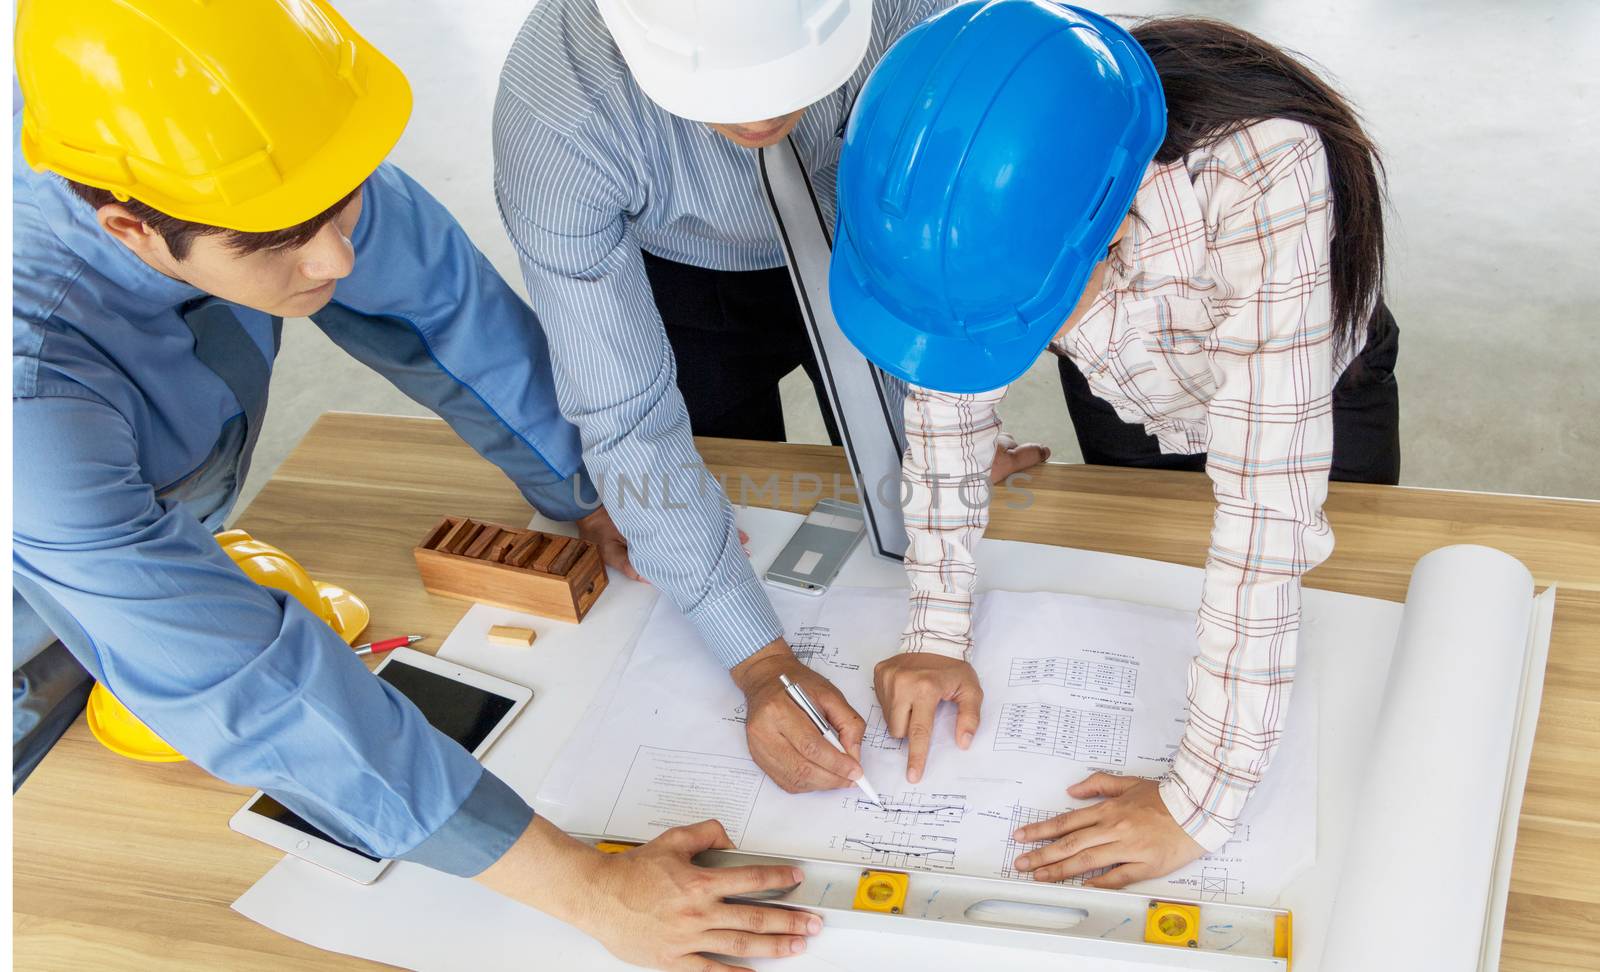 A group of engineers are looking at a blueprint for construction on the table. Engineering concept.